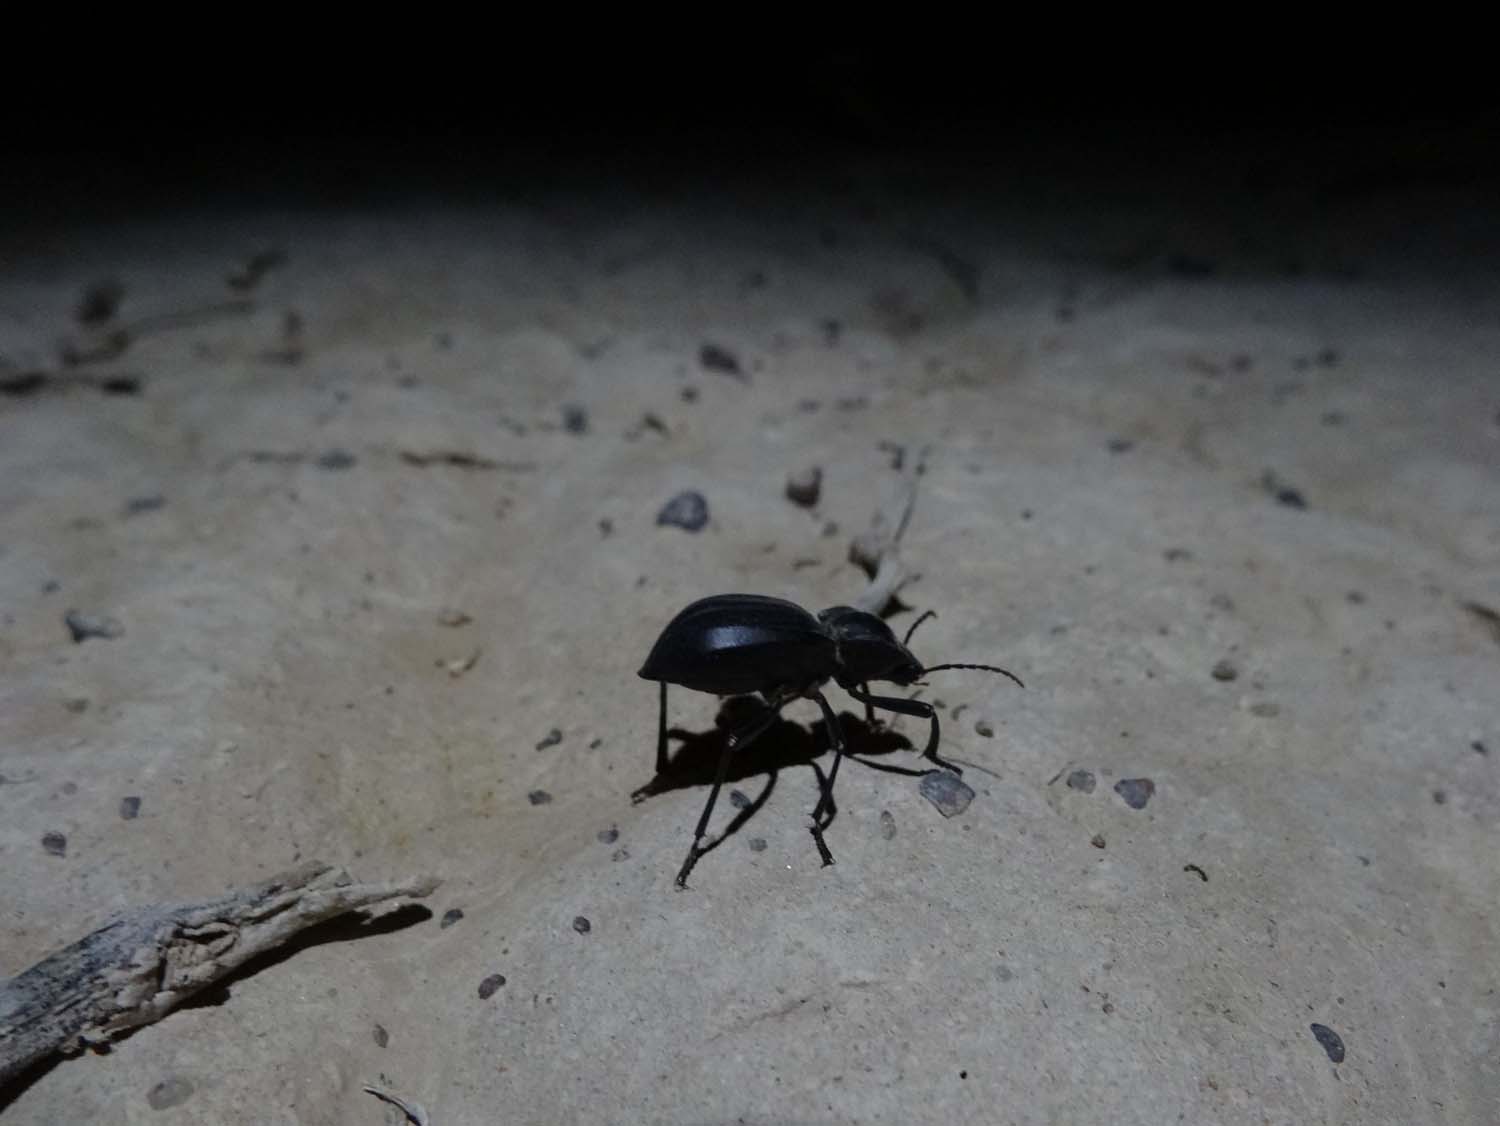 a big beetle was walking around our campsite one night in the desert